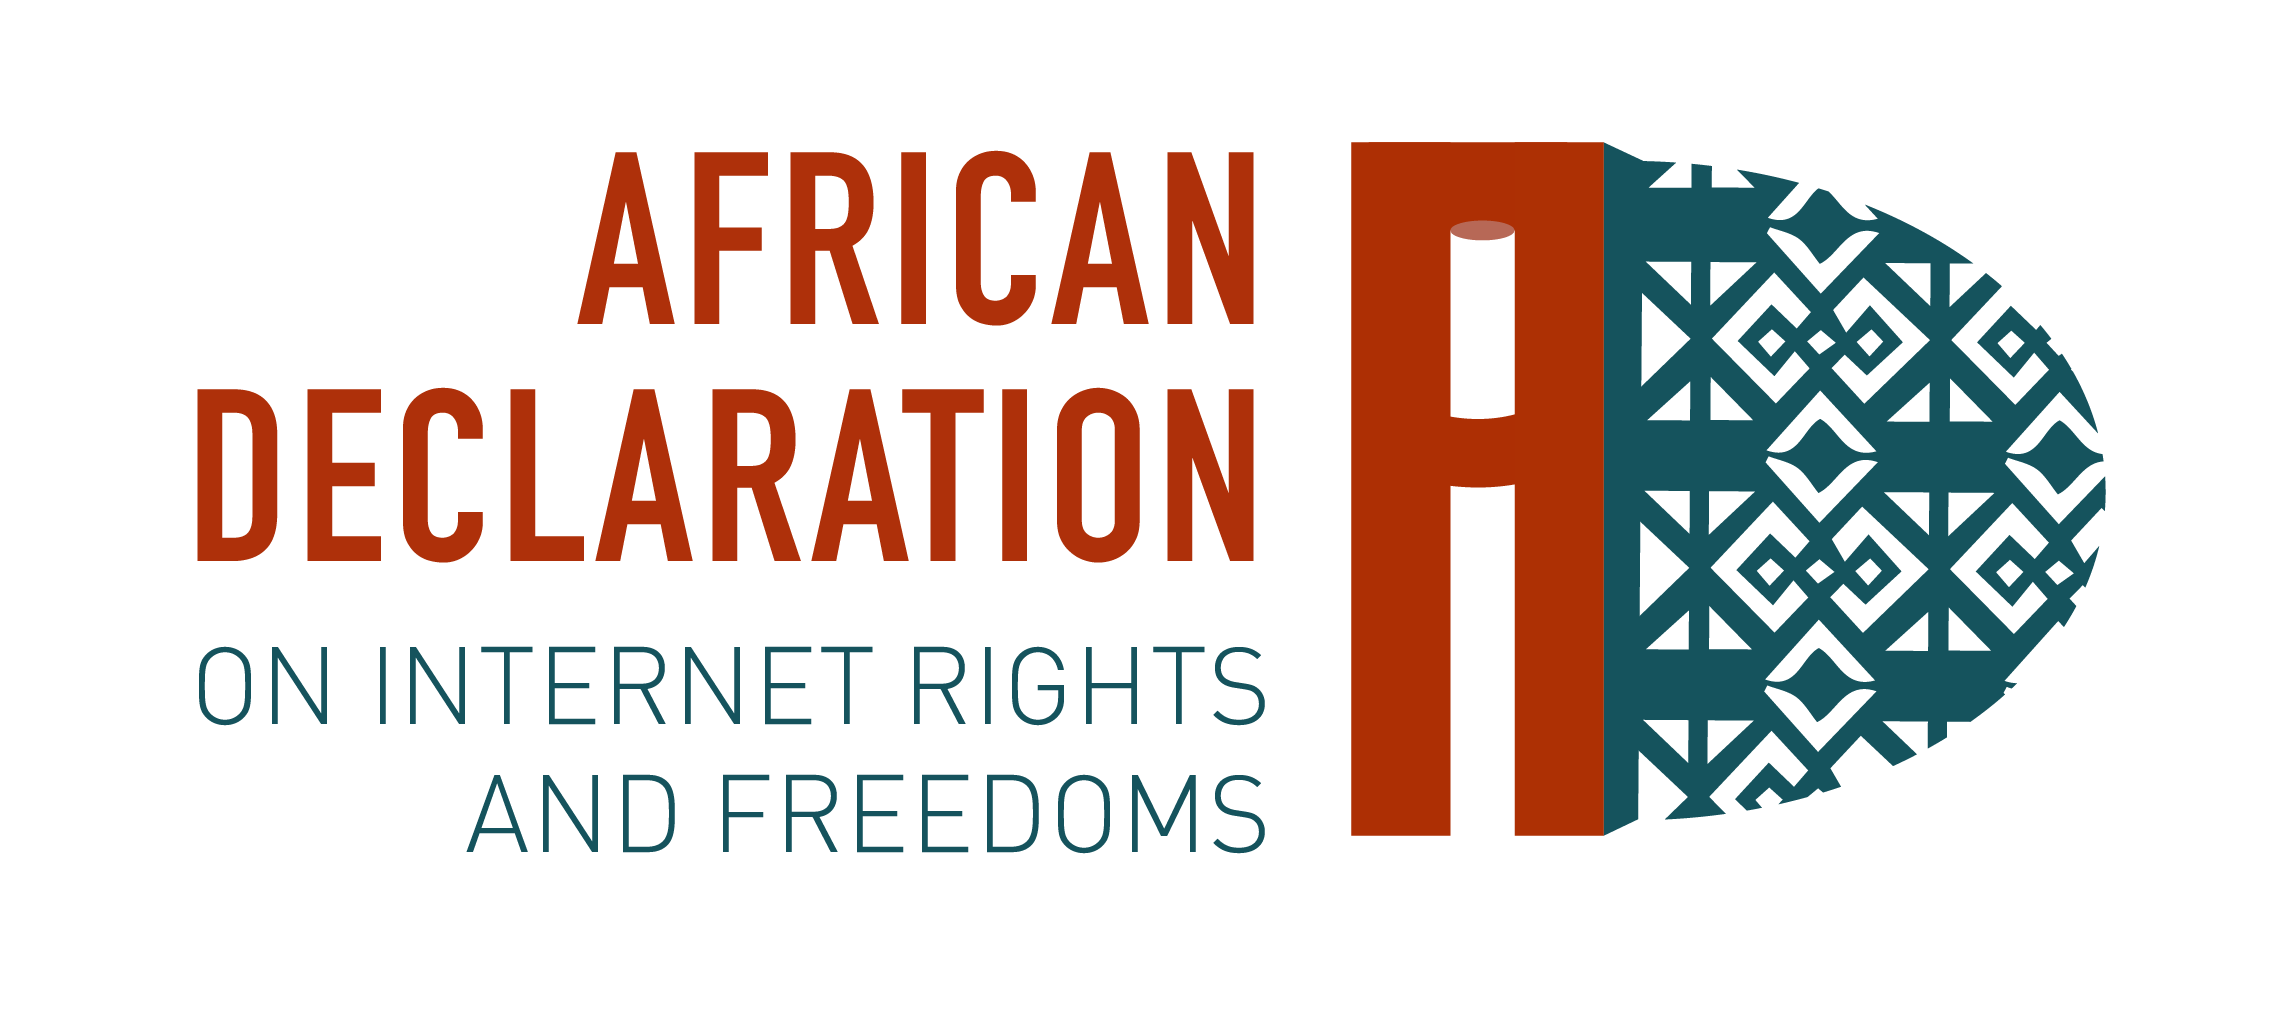 African Declaration on Internet Rights